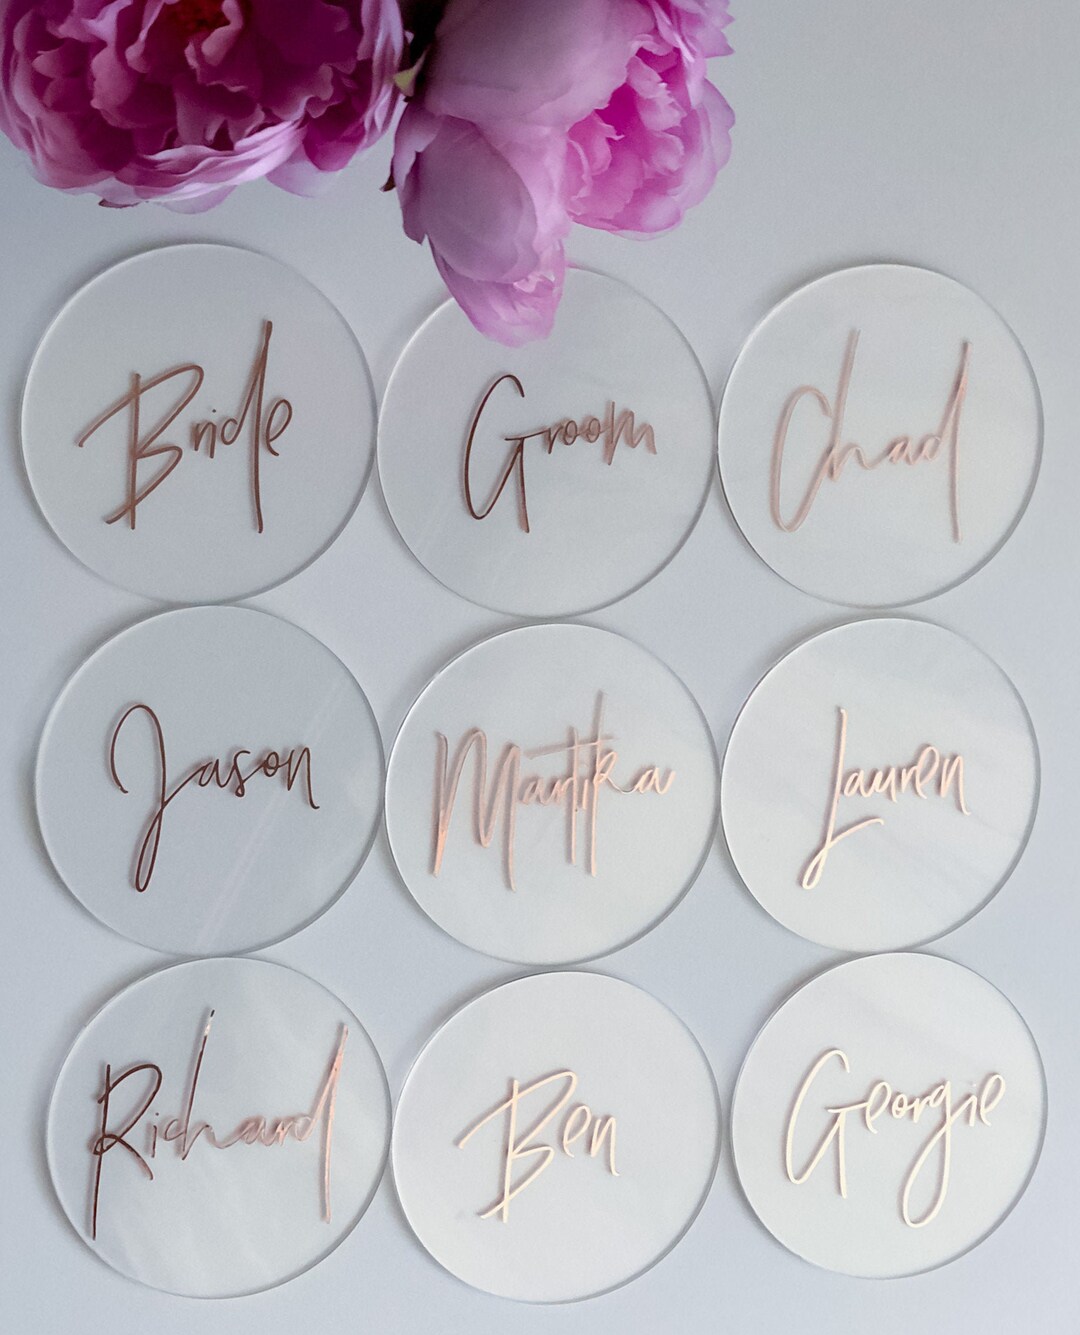 Blank Frosted Acrylic Place Card With Vinyl Calligraphy Wedding Guest Names  Escort Cards Bridal/baby Shower,party Decor Food Tag - Place Cards & Place  Card Holders - AliExpress